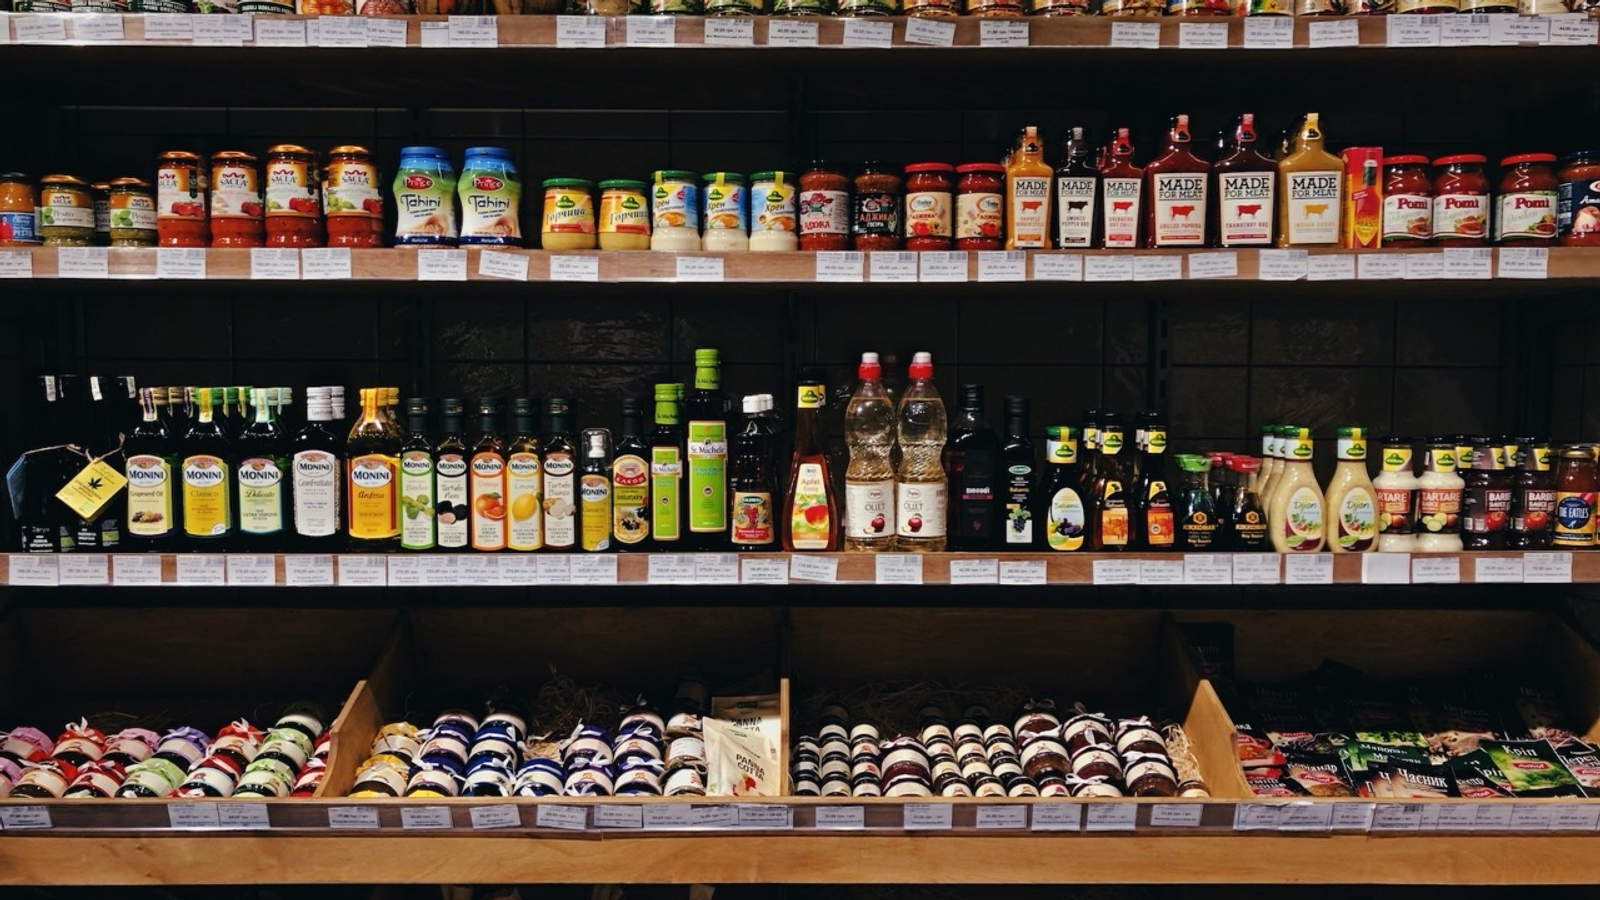 Cans and jars of food on shelves